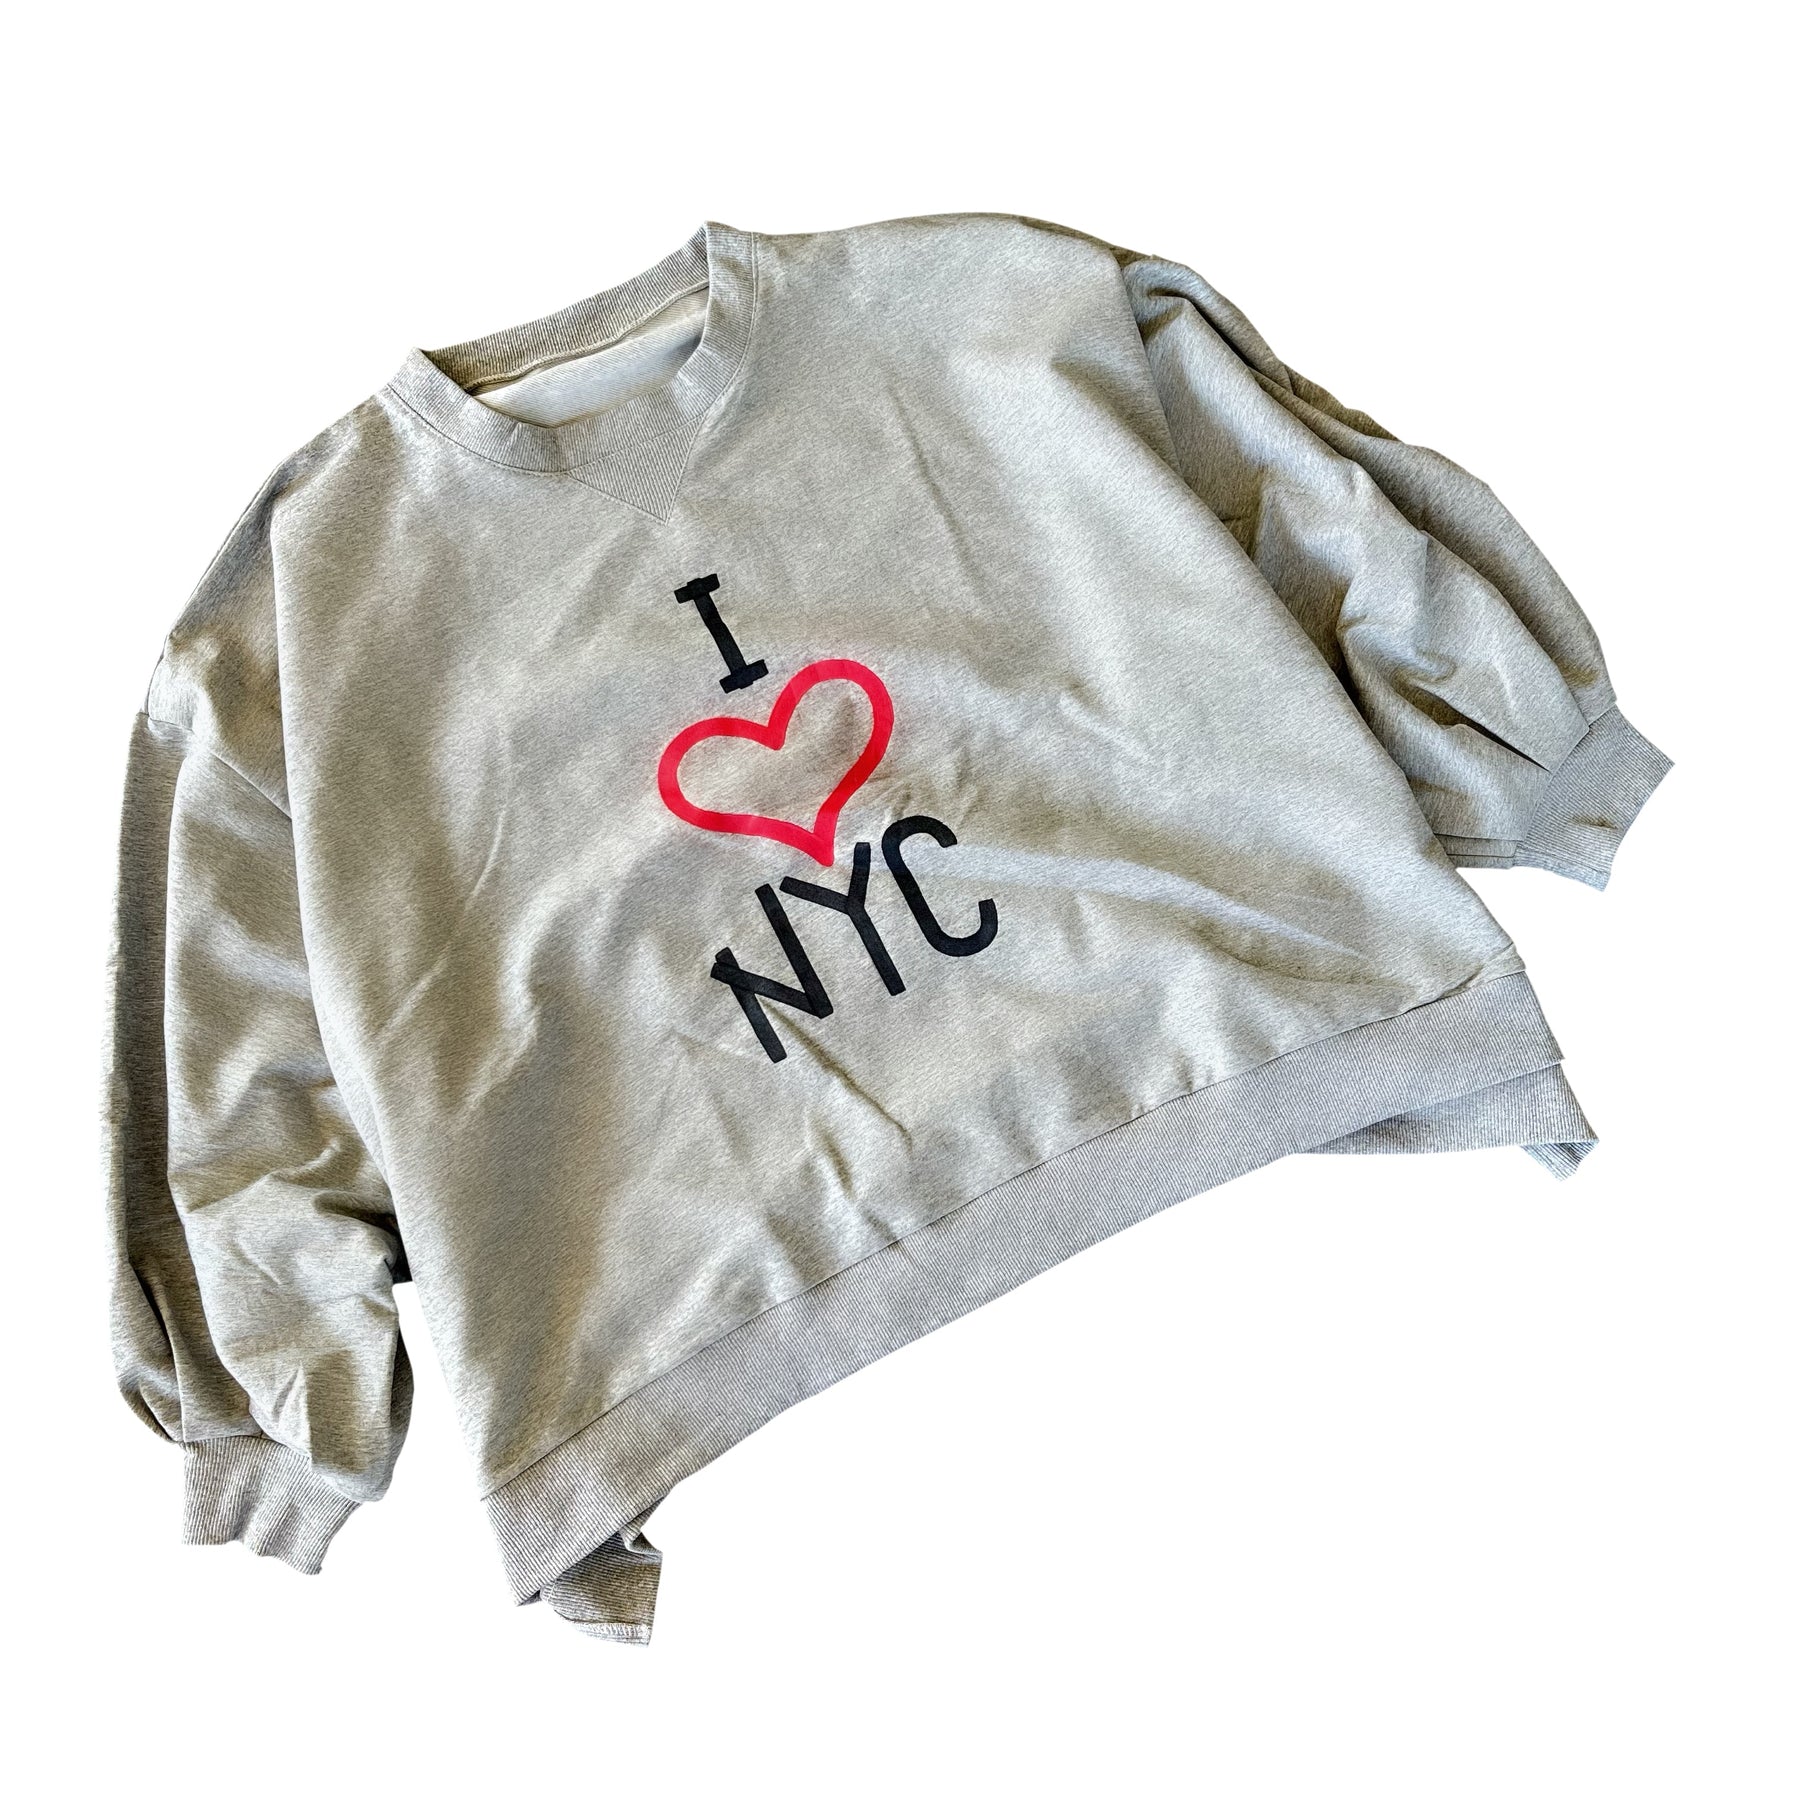 'I Heart NYC' Painted Sweater